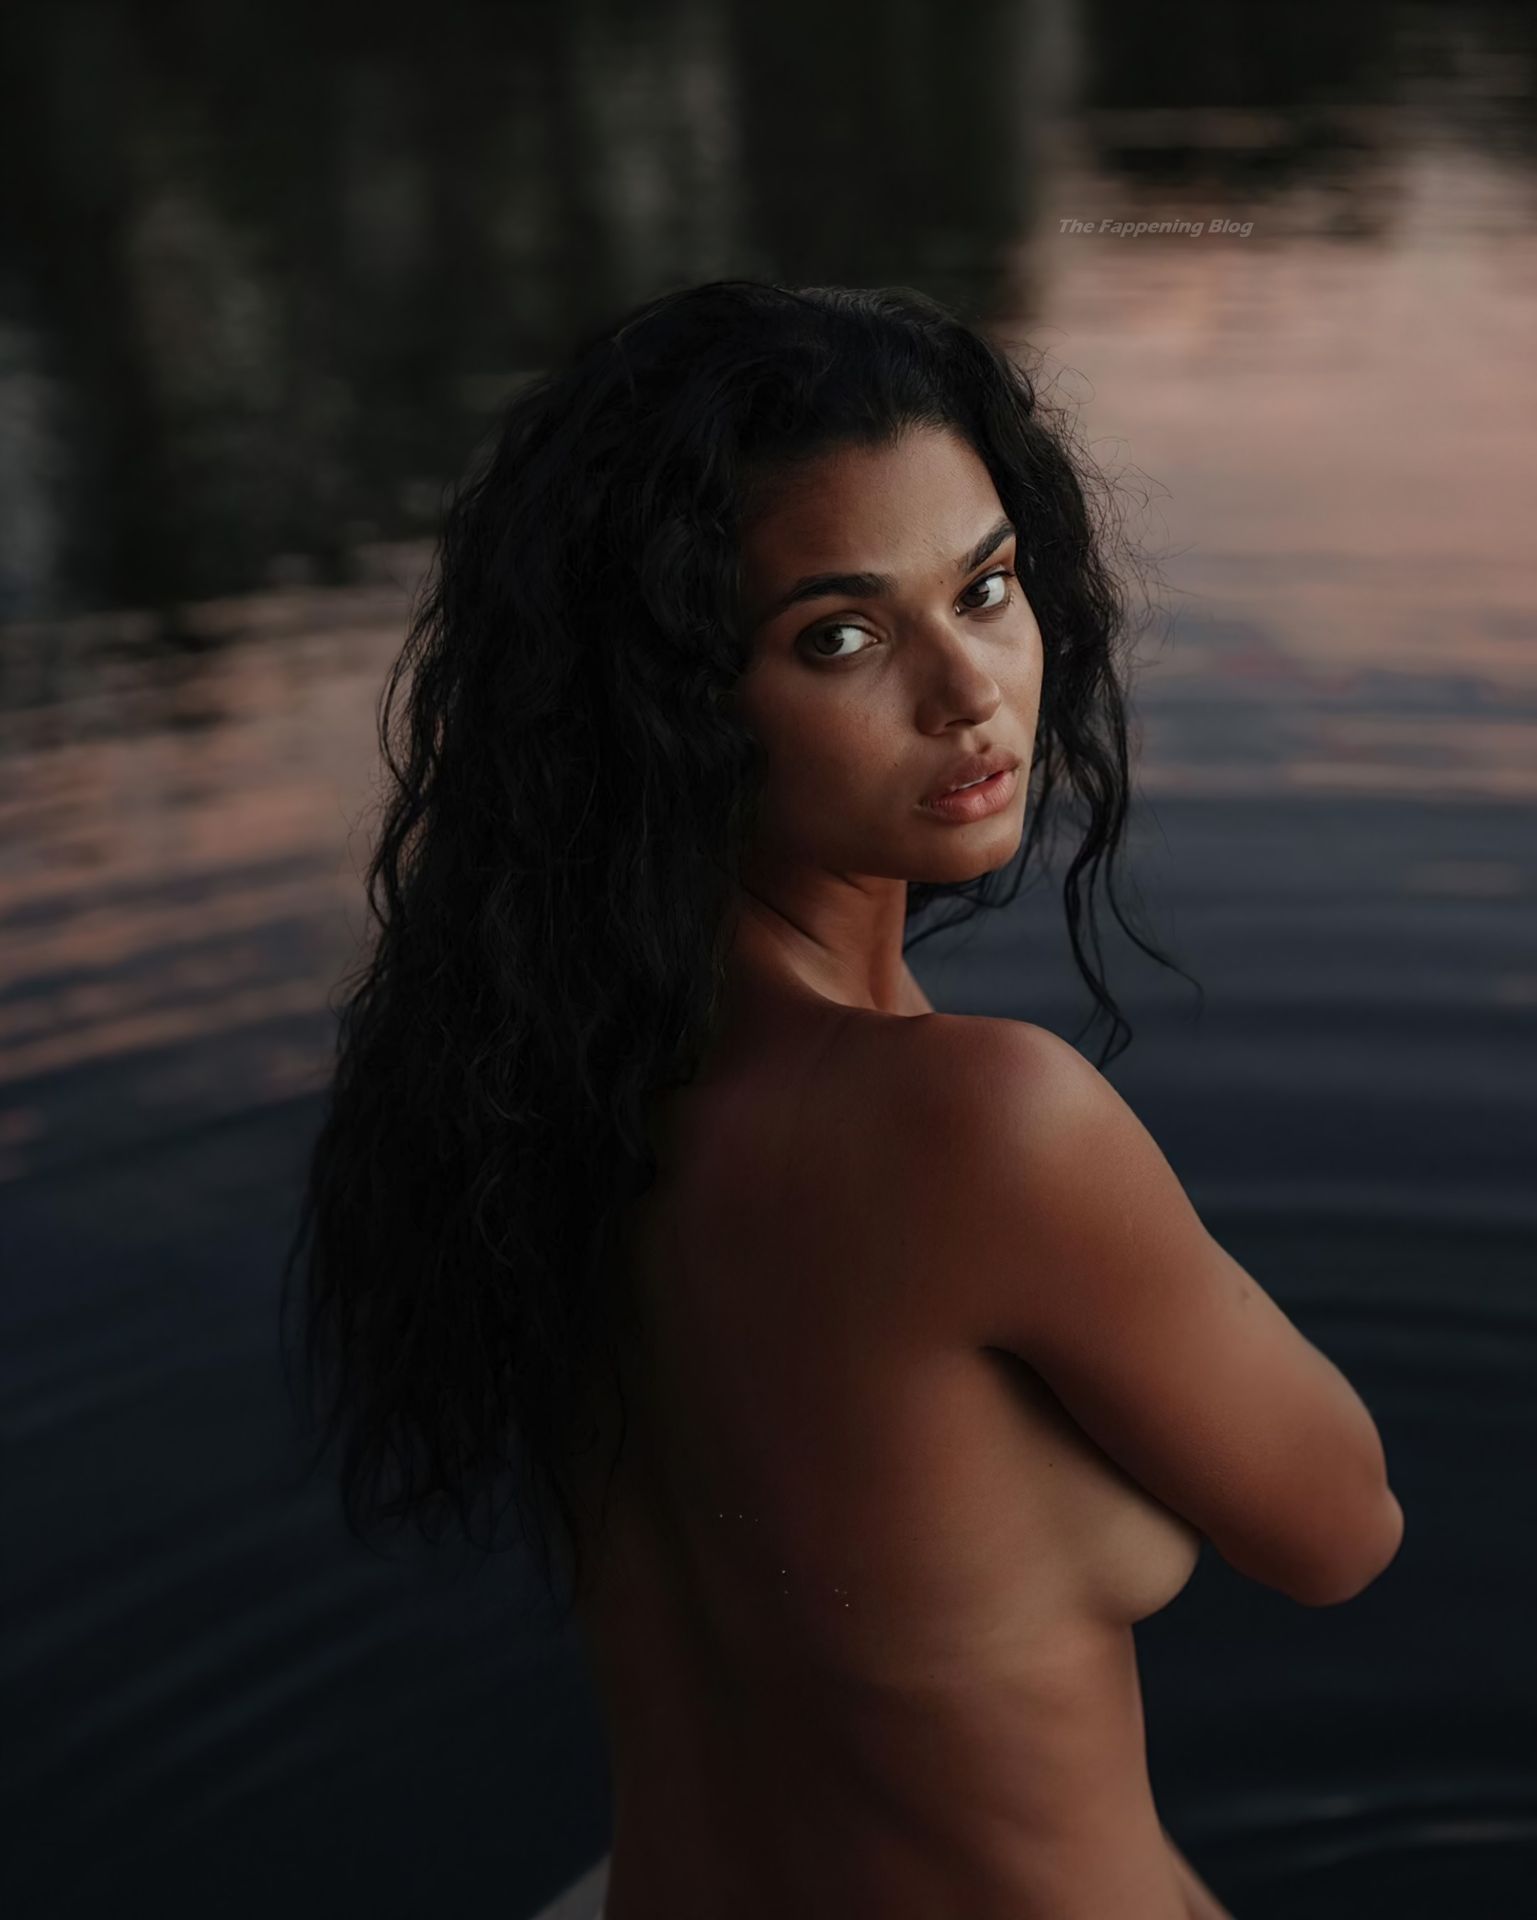 Model Daniela Braga shows off her tanned figure posing almost nude and in b...